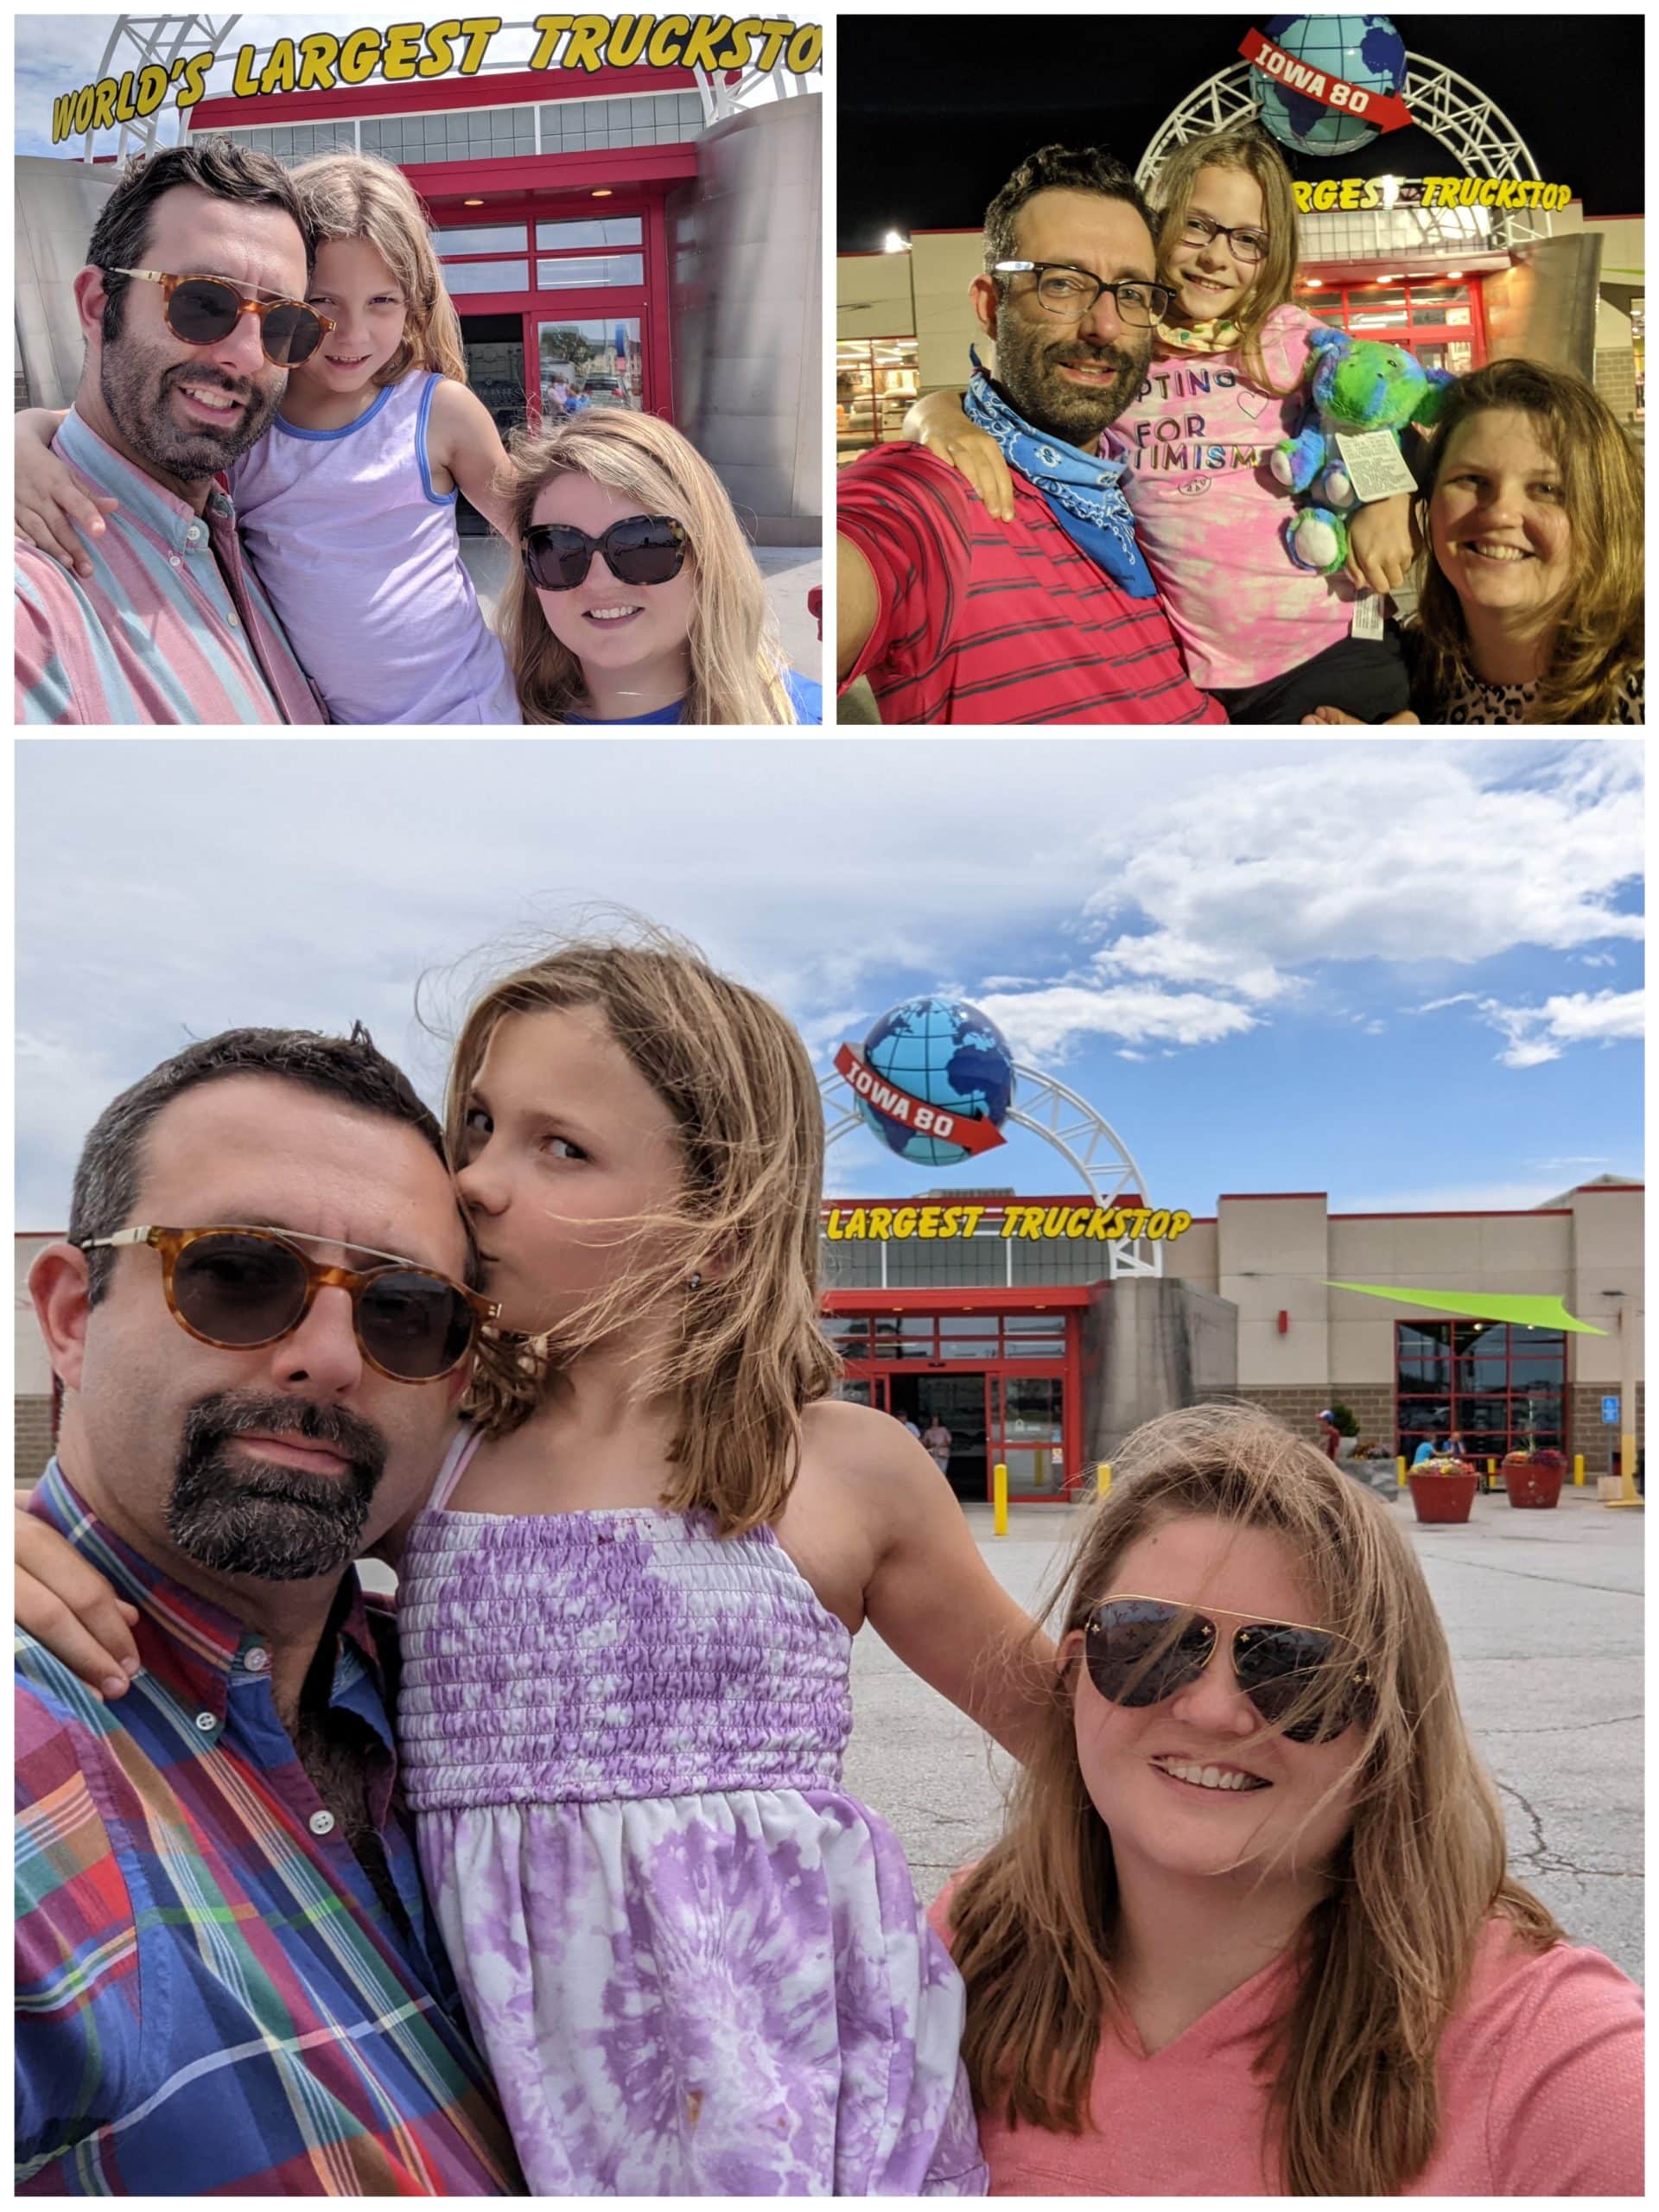 collage of photos of Beth, Zach, and Ada in front of the Iowa 80 truck stop